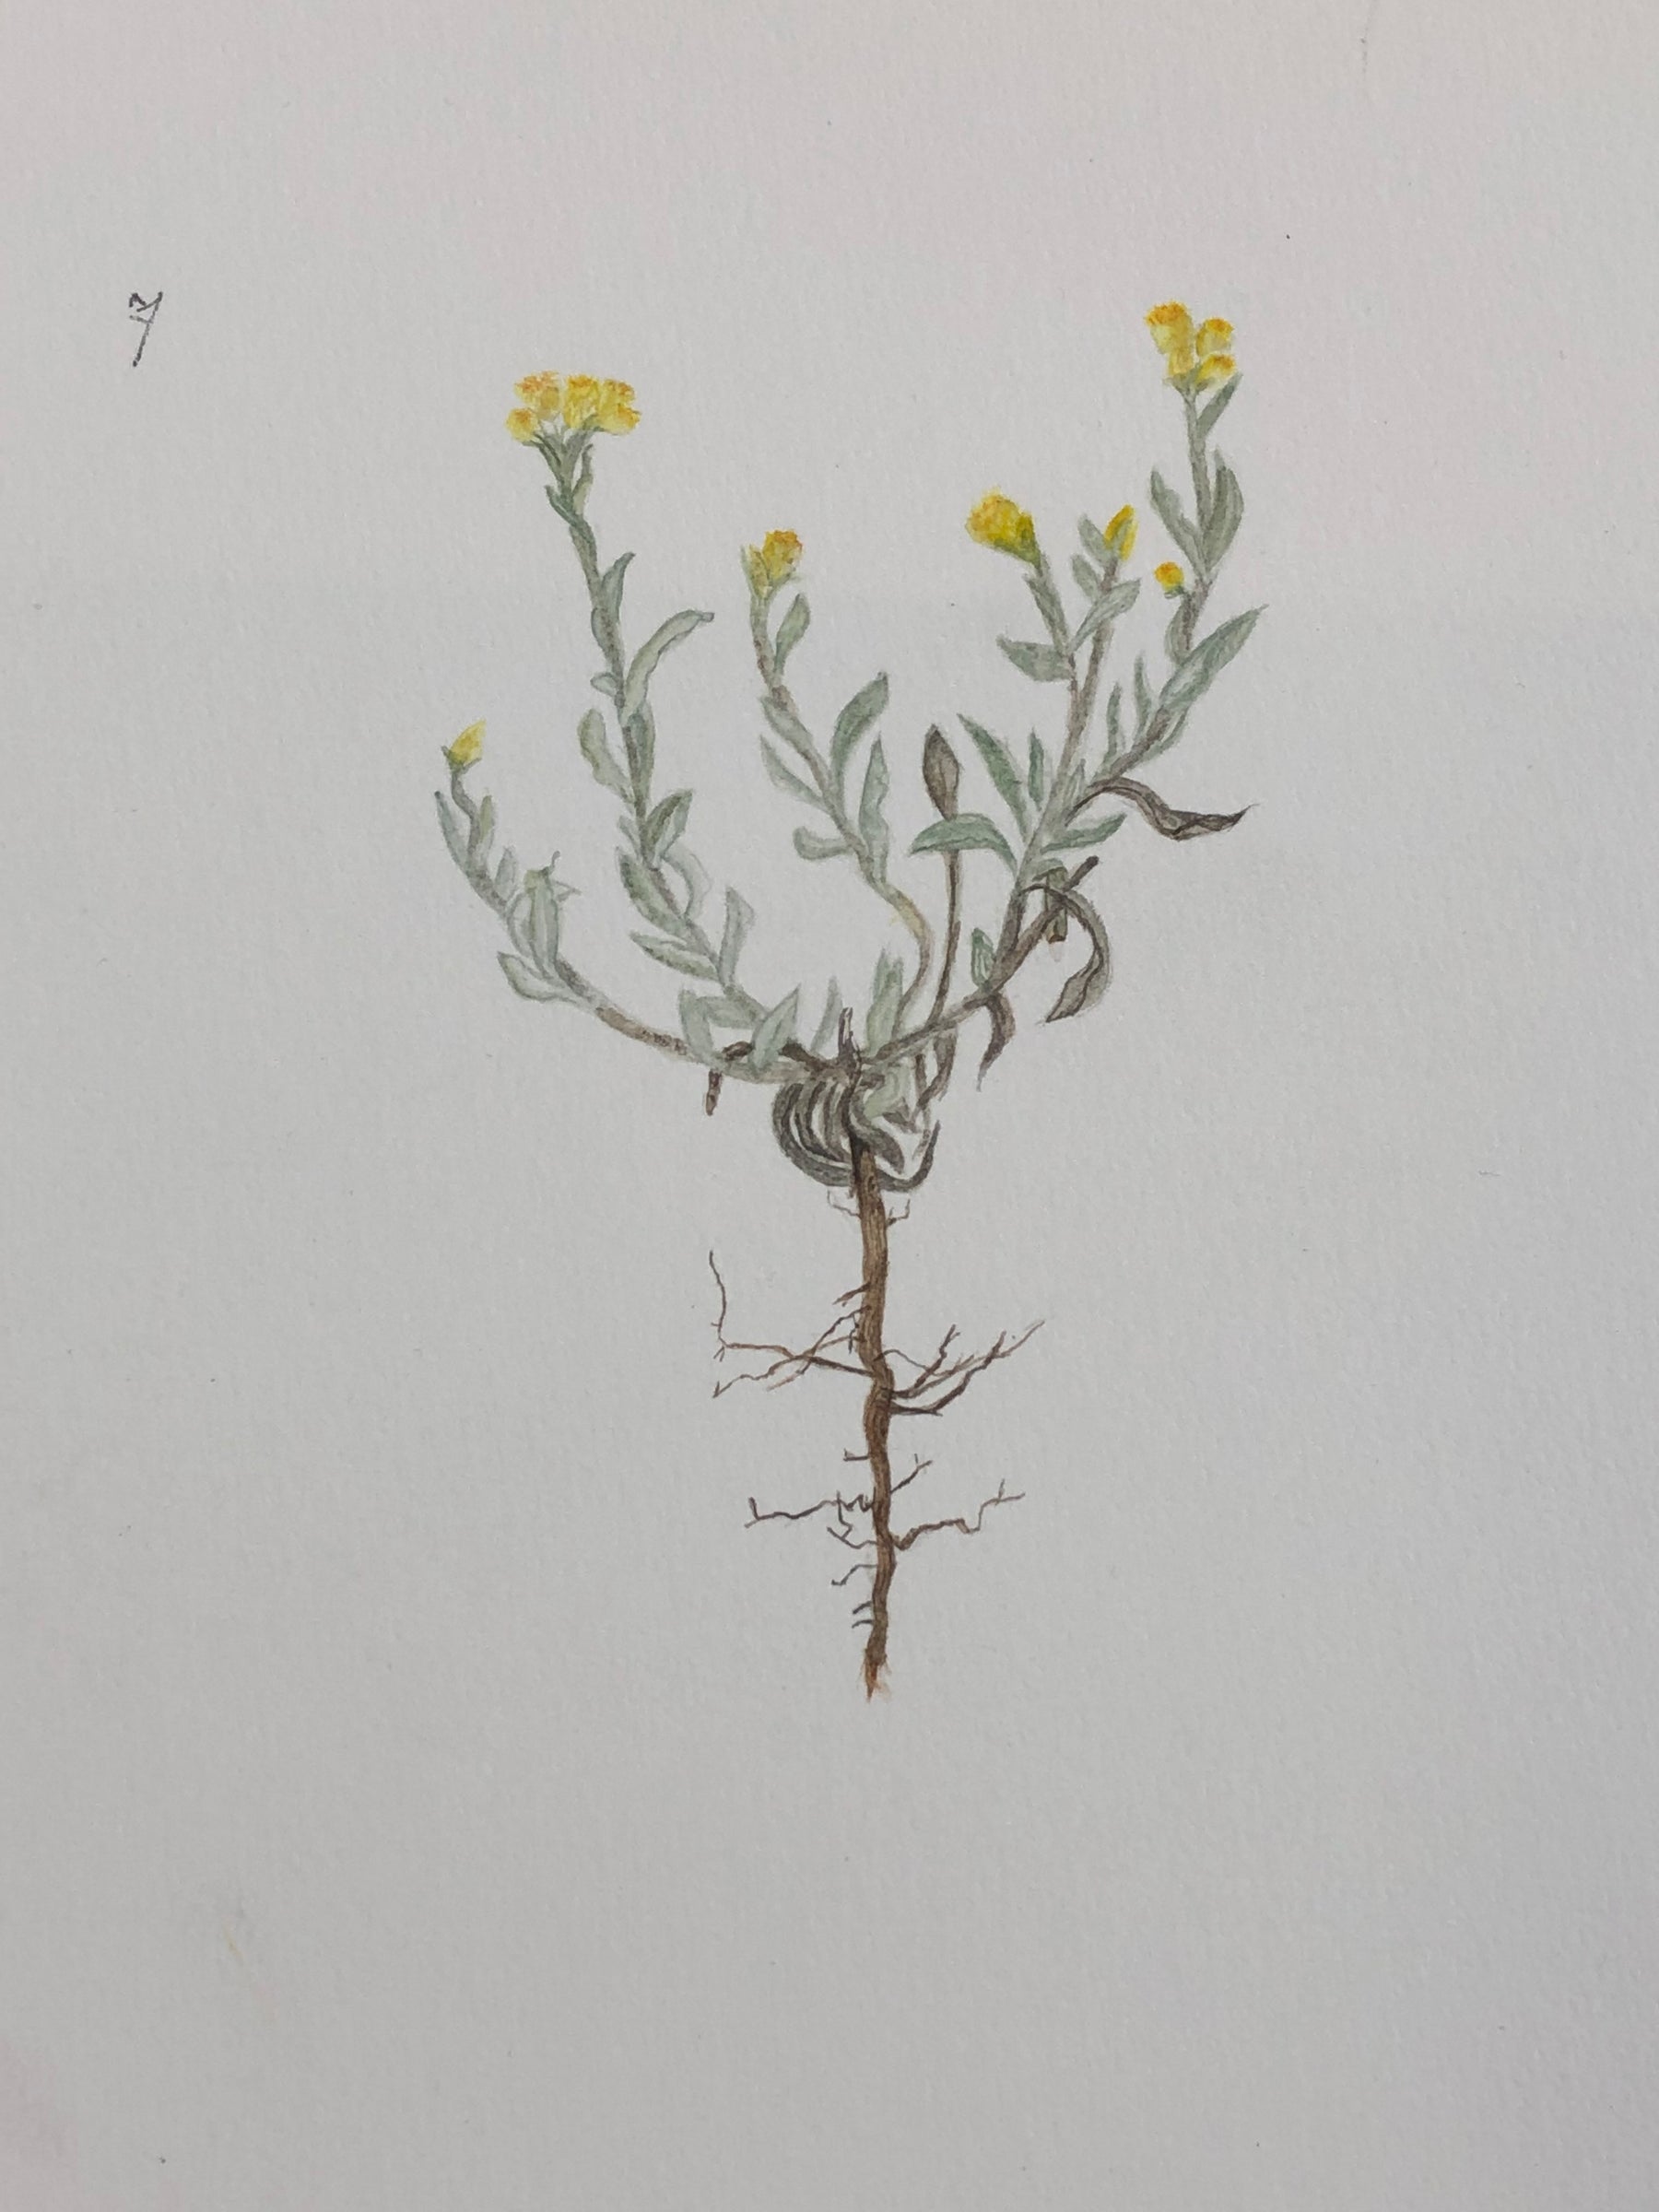 Artwork by Rachael Robb. Art class with Mali Moir featured the plants of Mulligans Flat including this beautiful yellow-flowering grey-leaved native plant. 